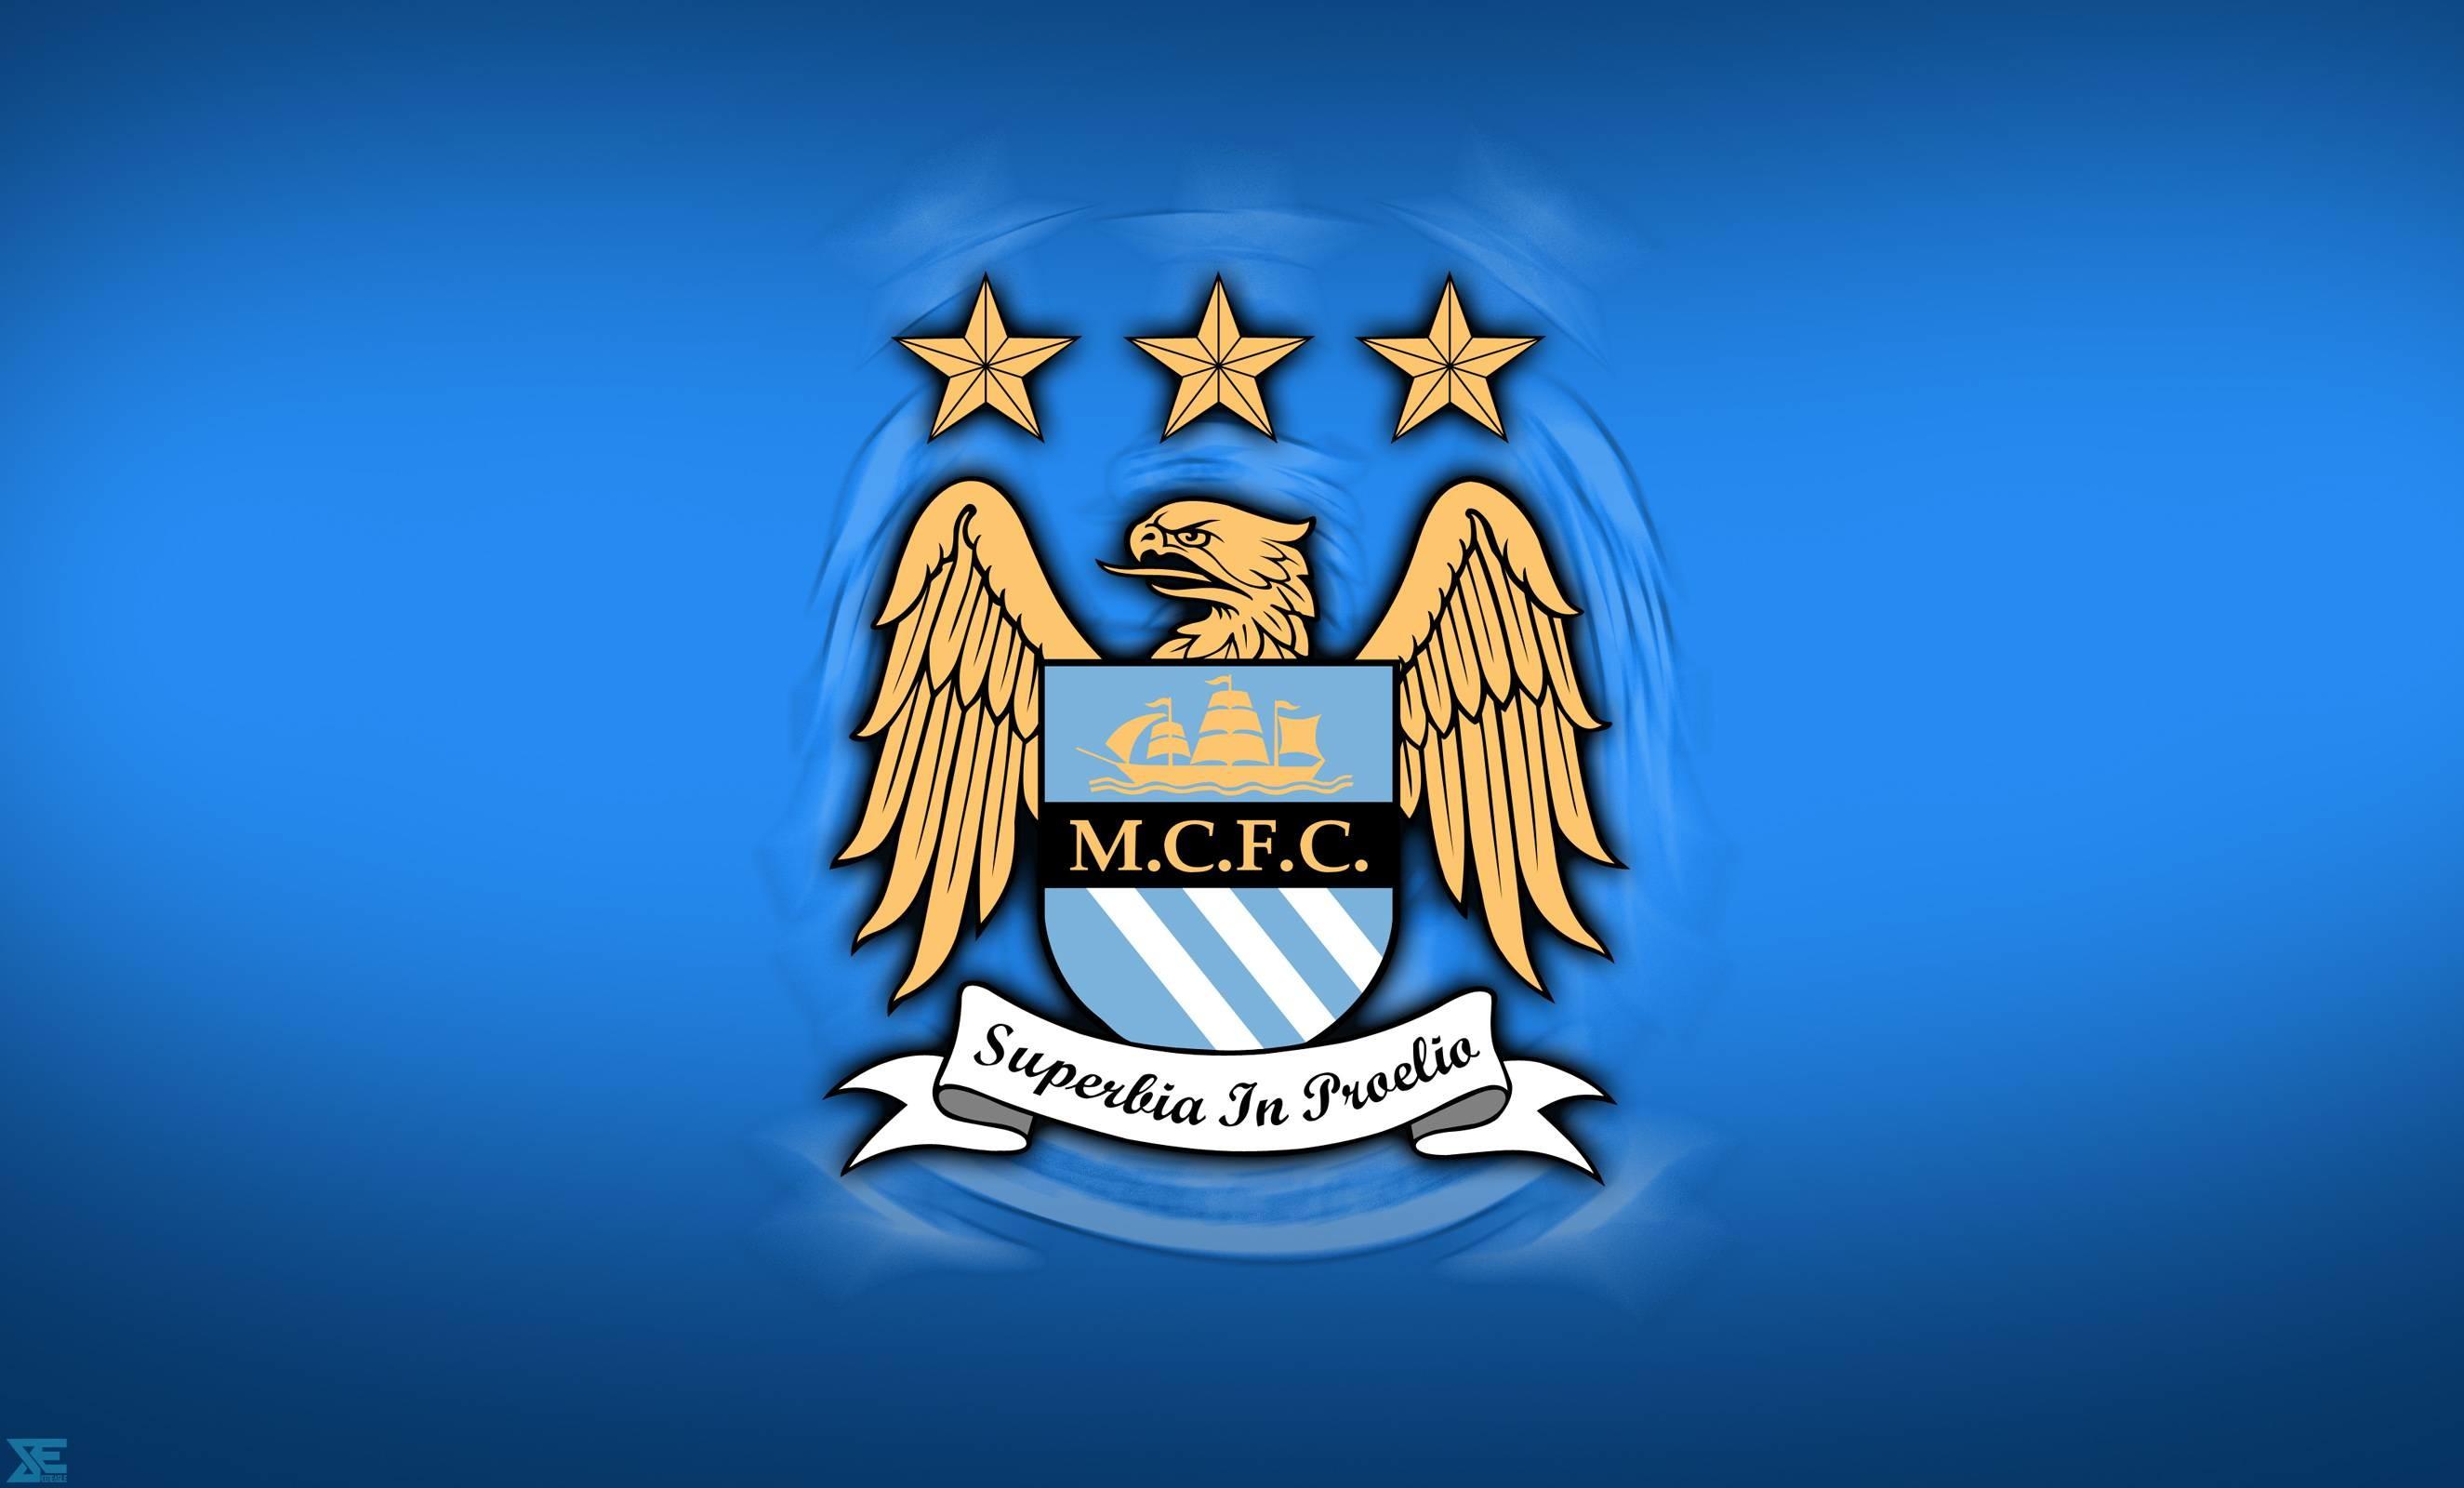 Manchester City Background